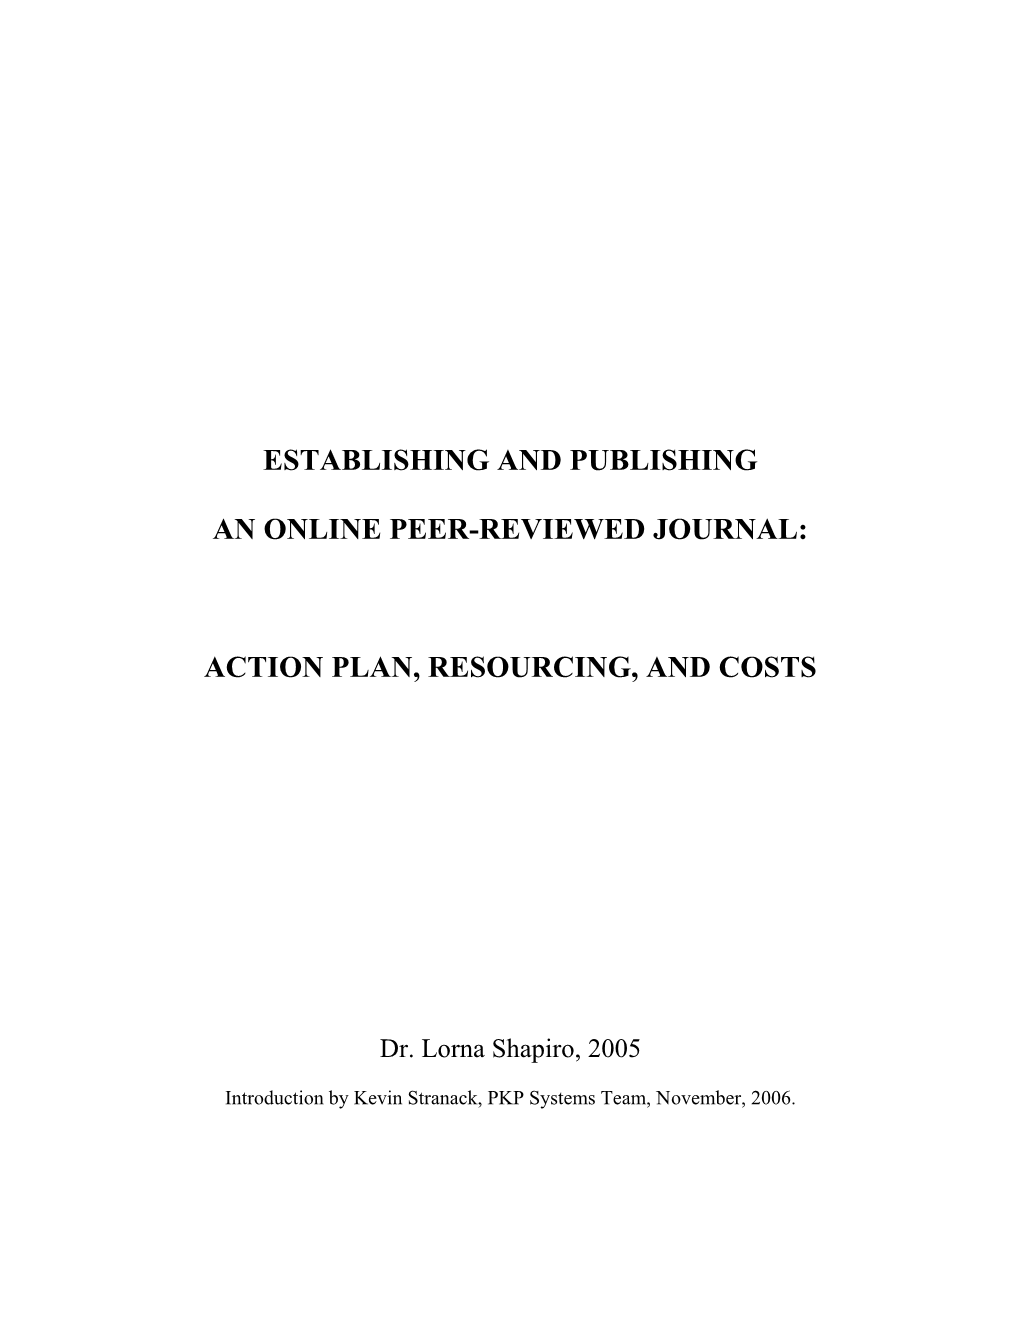 Establishing and Publishing an Online Peer-Reviewed Journal 2 Action Plan, Resourcing, and Costs Table of Contents